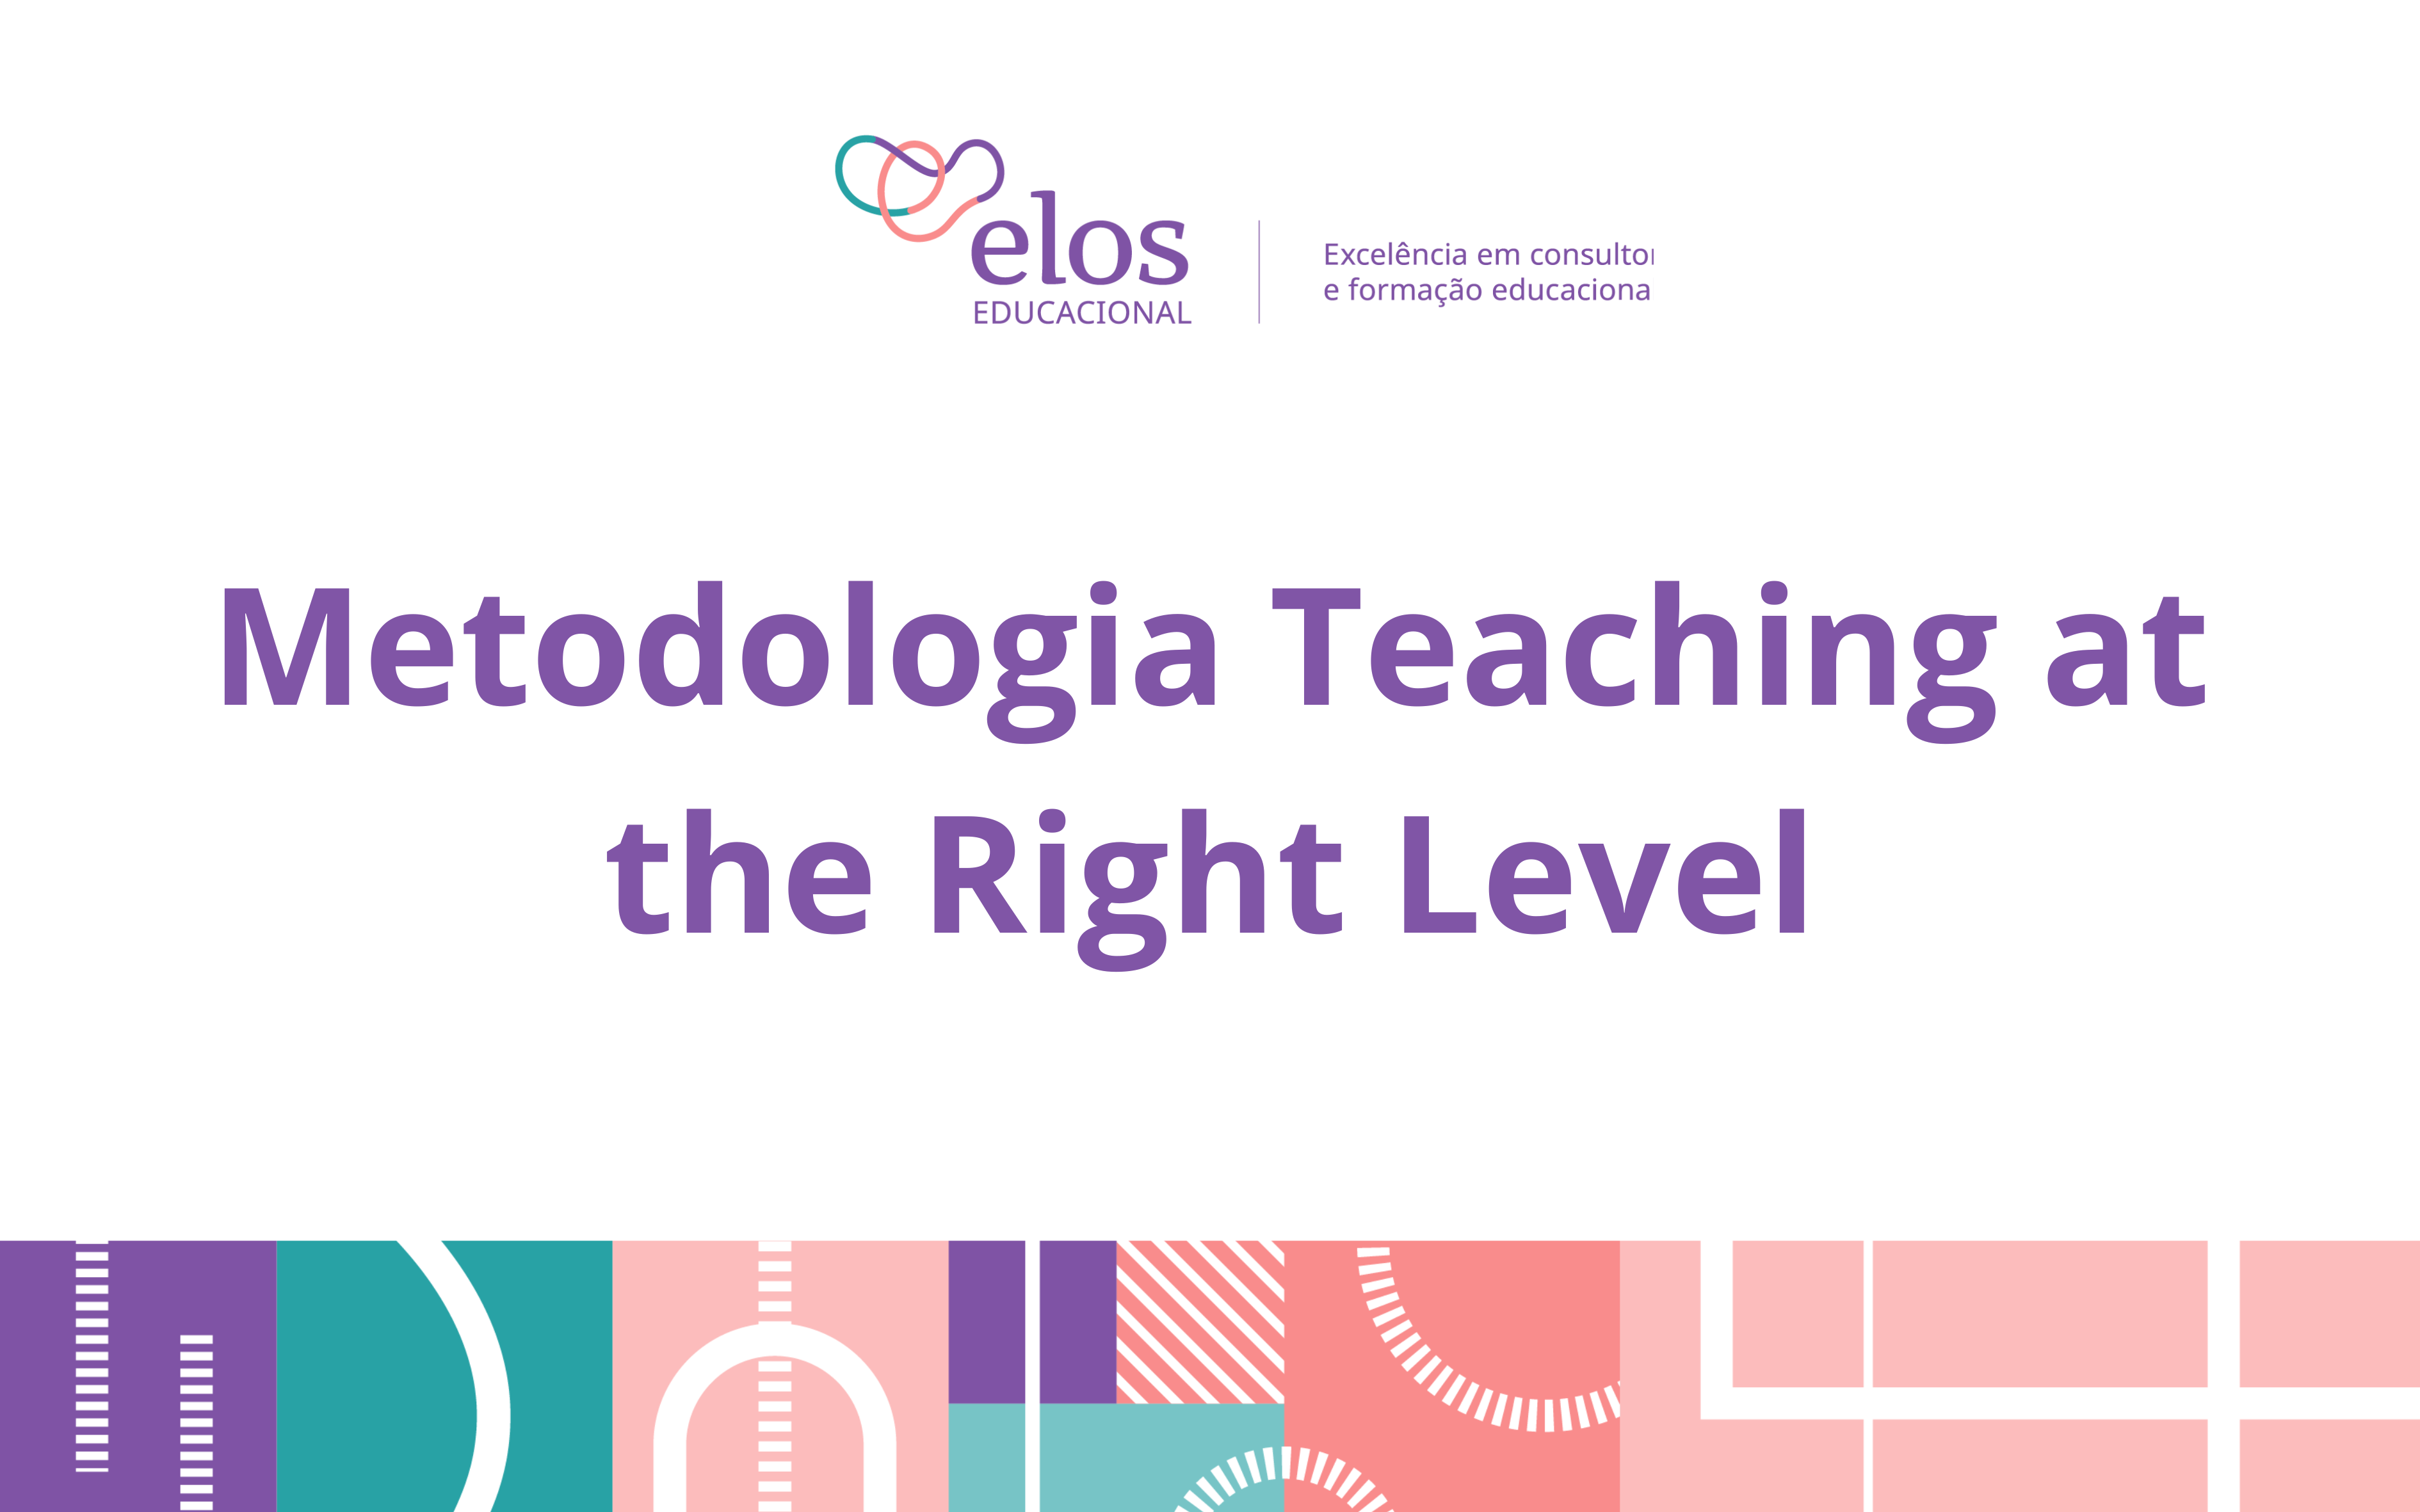 Metodologia Teaching at the Right Level